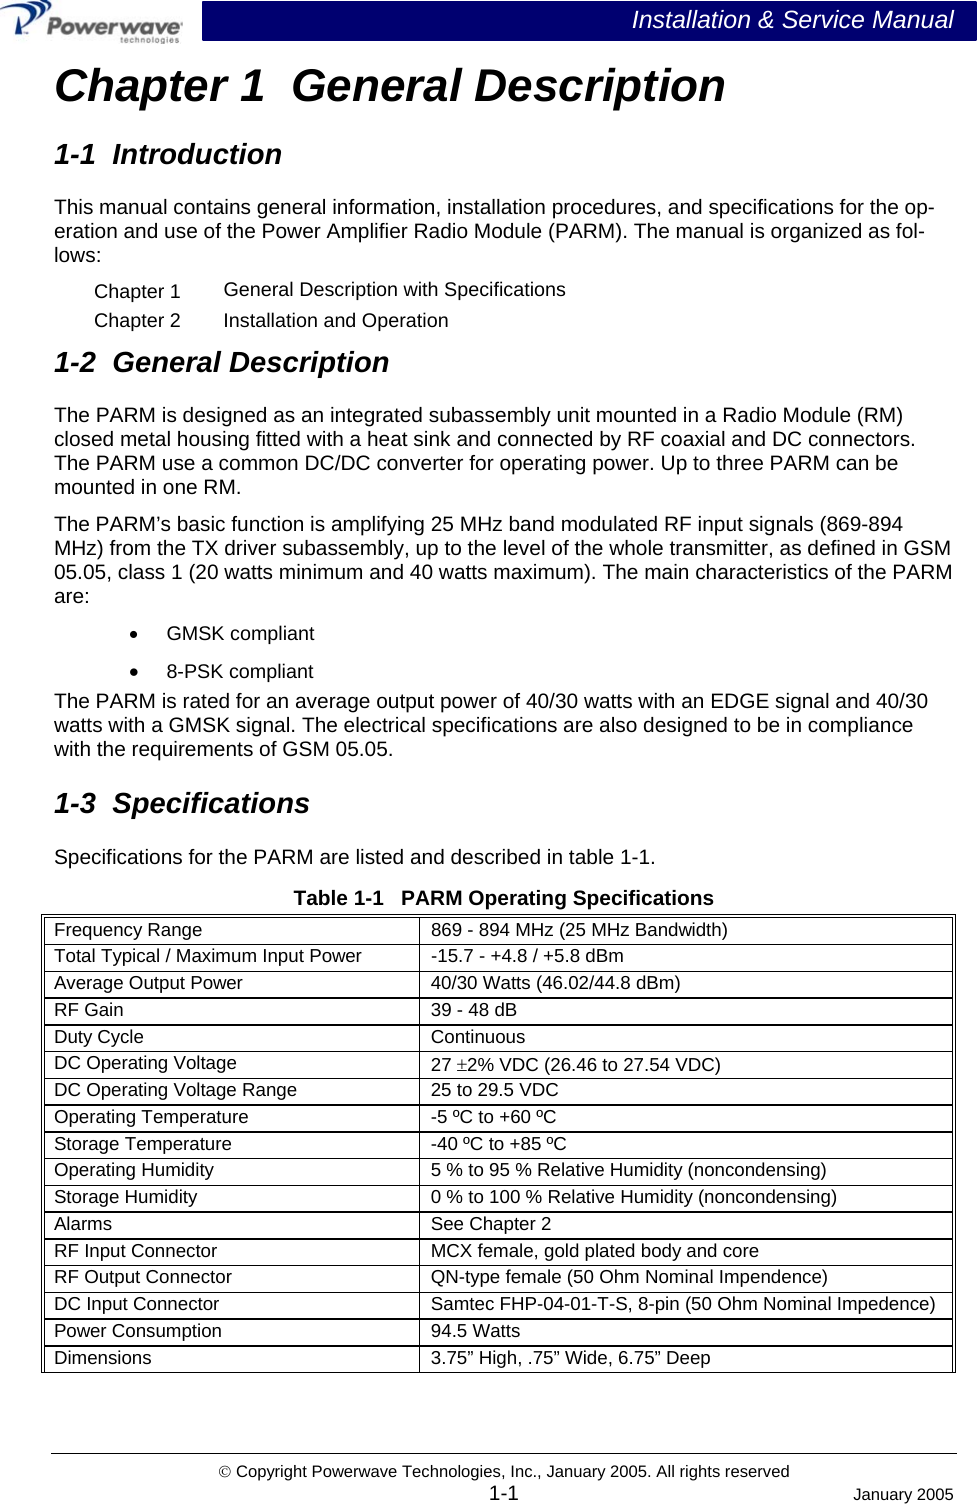  Installation &amp; Service Manual © Copyright Powerwave Technologies, Inc., January 2005. All rights reserved Chapter 1  General Description 1-1  Introduction This manual contains general information, installation procedures, and specifications for the op-eration and use of the Power Amplifier Radio Module (PARM). The manual is organized as fol-lows: Chapter 1  General Description with Specifications Chapter 2  Installation and Operation 1-2  General Description The PARM is designed as an integrated subassembly unit mounted in a Radio Module (RM) closed metal housing fitted with a heat sink and connected by RF coaxial and DC connectors. The PARM use a common DC/DC converter for operating power. Up to three PARM can be mounted in one RM.   The PARM’s basic function is amplifying 25 MHz band modulated RF input signals (869-894 MHz) from the TX driver subassembly, up to the level of the whole transmitter, as defined in GSM 05.05, class 1 (20 watts minimum and 40 watts maximum). The main characteristics of the PARM are: •  GMSK compliant •  8-PSK compliant The PARM is rated for an average output power of 40/30 watts with an EDGE signal and 40/30 watts with a GMSK signal. The electrical specifications are also designed to be in compliance with the requirements of GSM 05.05. 1-3  Specifications Specifications for the PARM are listed and described in table 1-1. Table 1-1   PARM Operating Specifications Frequency Range  869 - 894 MHz (25 MHz Bandwidth) Total Typical / Maximum Input Power  -15.7 - +4.8 / +5.8 dBm  Average Output Power  40/30 Watts (46.02/44.8 dBm)  RF Gain   39 - 48 dB  Duty Cycle  Continuous DC Operating Voltage  27 ±2% VDC (26.46 to 27.54 VDC) DC Operating Voltage Range  25 to 29.5 VDC Operating Temperature  -5 ºC to +60 ºC Storage Temperature  -40 ºC to +85 ºC Operating Humidity  5 % to 95 % Relative Humidity (noncondensing) Storage Humidity  0 % to 100 % Relative Humidity (noncondensing) Alarms  See Chapter 2 RF Input Connector  MCX female, gold plated body and core RF Output Connector  QN-type female (50 Ohm Nominal Impendence) DC Input Connector  Samtec FHP-04-01-T-S, 8-pin (50 Ohm Nominal Impedence) Power Consumption  94.5 Watts Dimensions 3.75” High, .75” Wide, 6.75” Deep   1-1 January 2005 